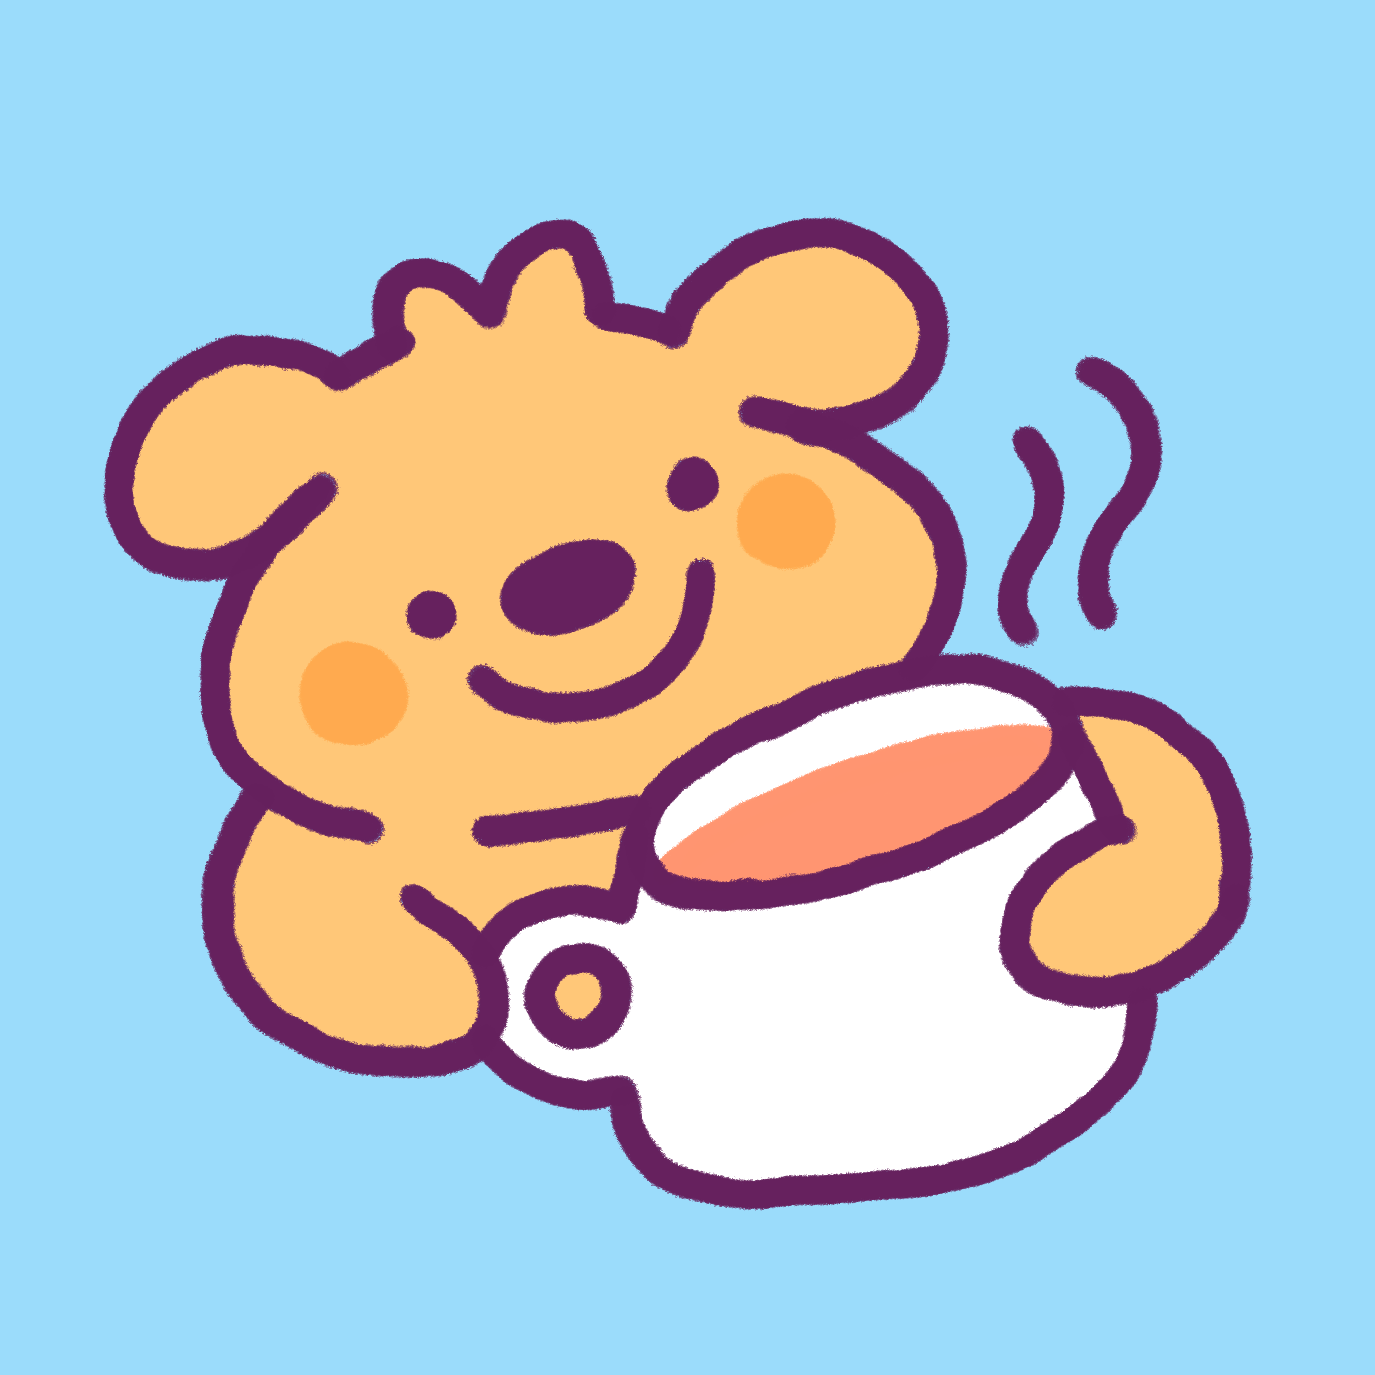 A dog with a large cup of coffee